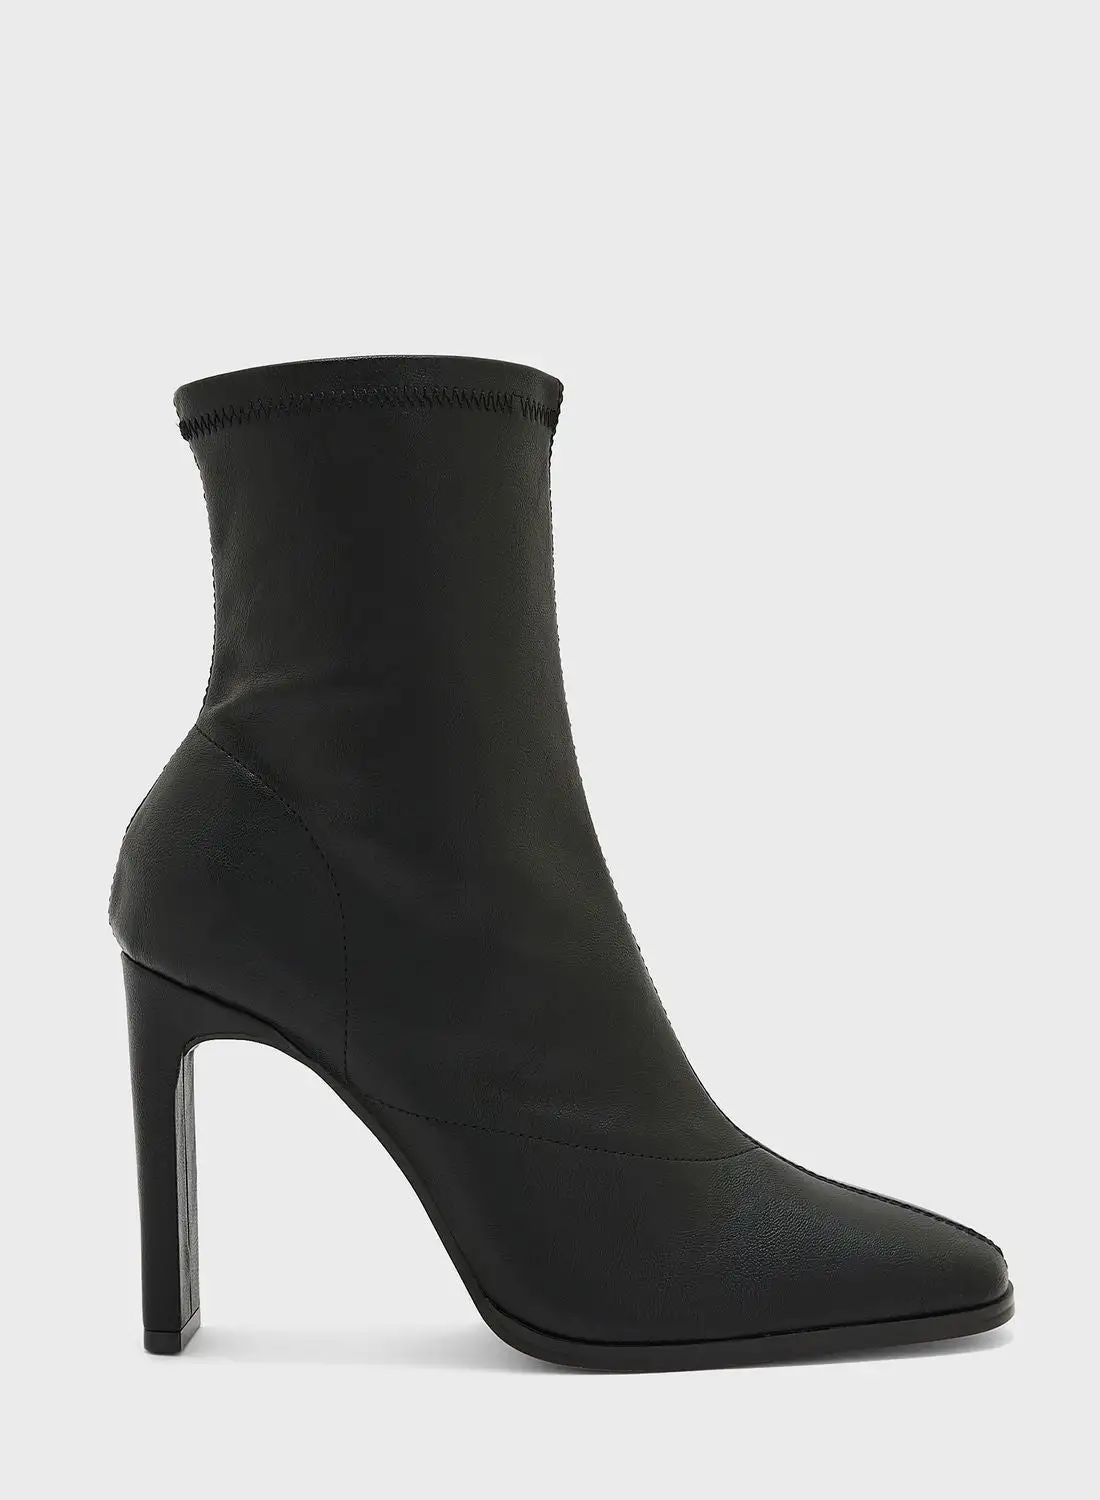 TOPSHOP Orla Ankle Boots